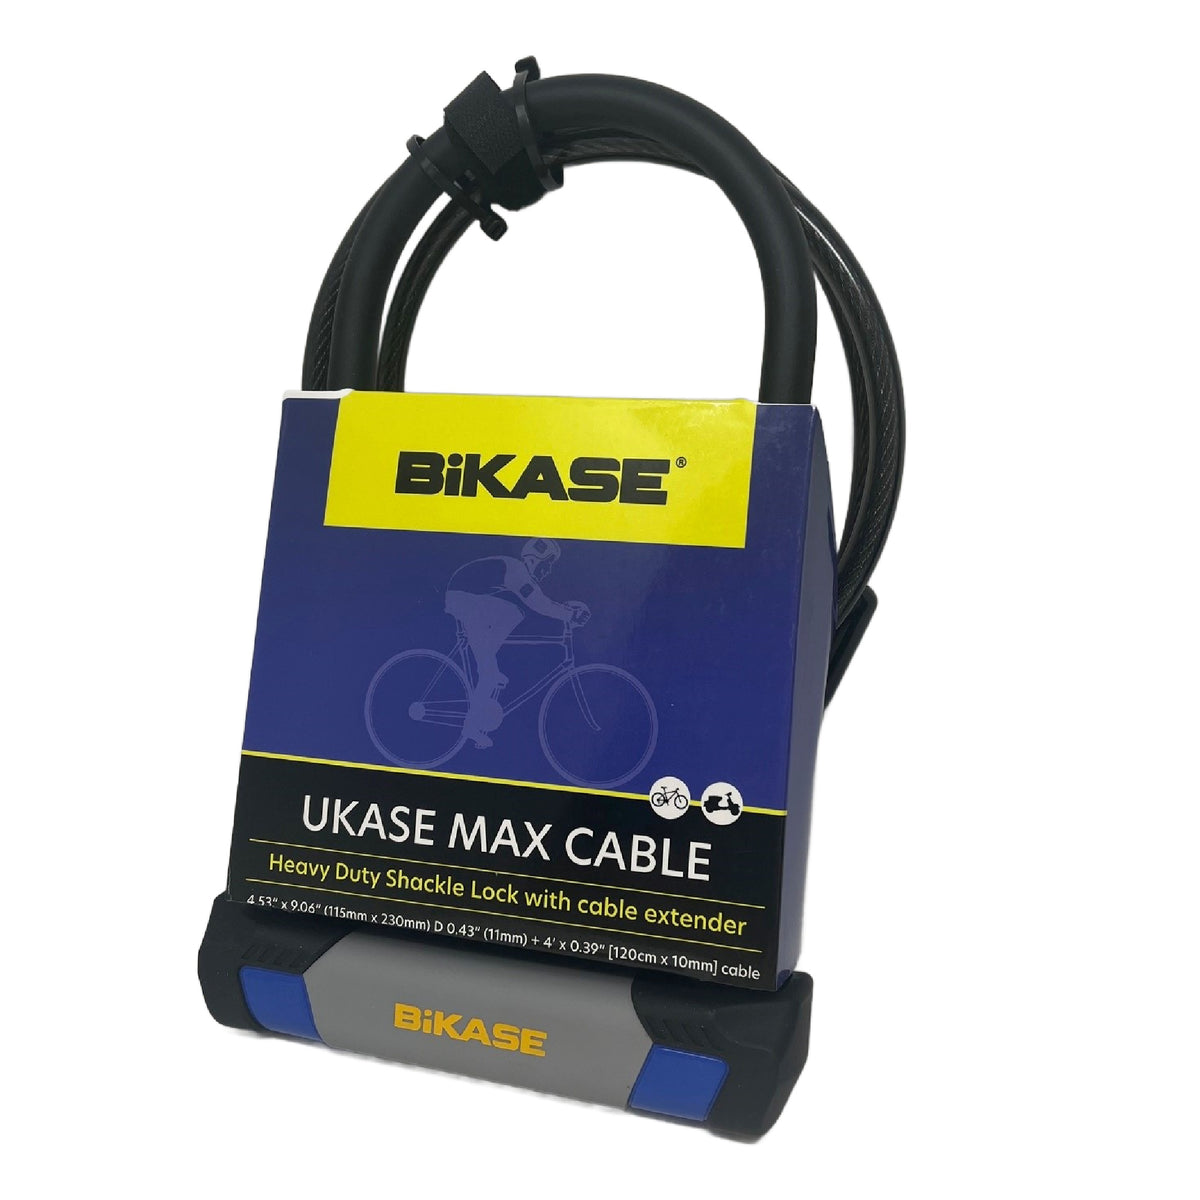 UKASE MAX Cable - Shackle: 4.53" x 9.06" (115mm x 230mm) Dia 0.43" (11mm)  + 4' x .39" (120cm x 10mm) cable